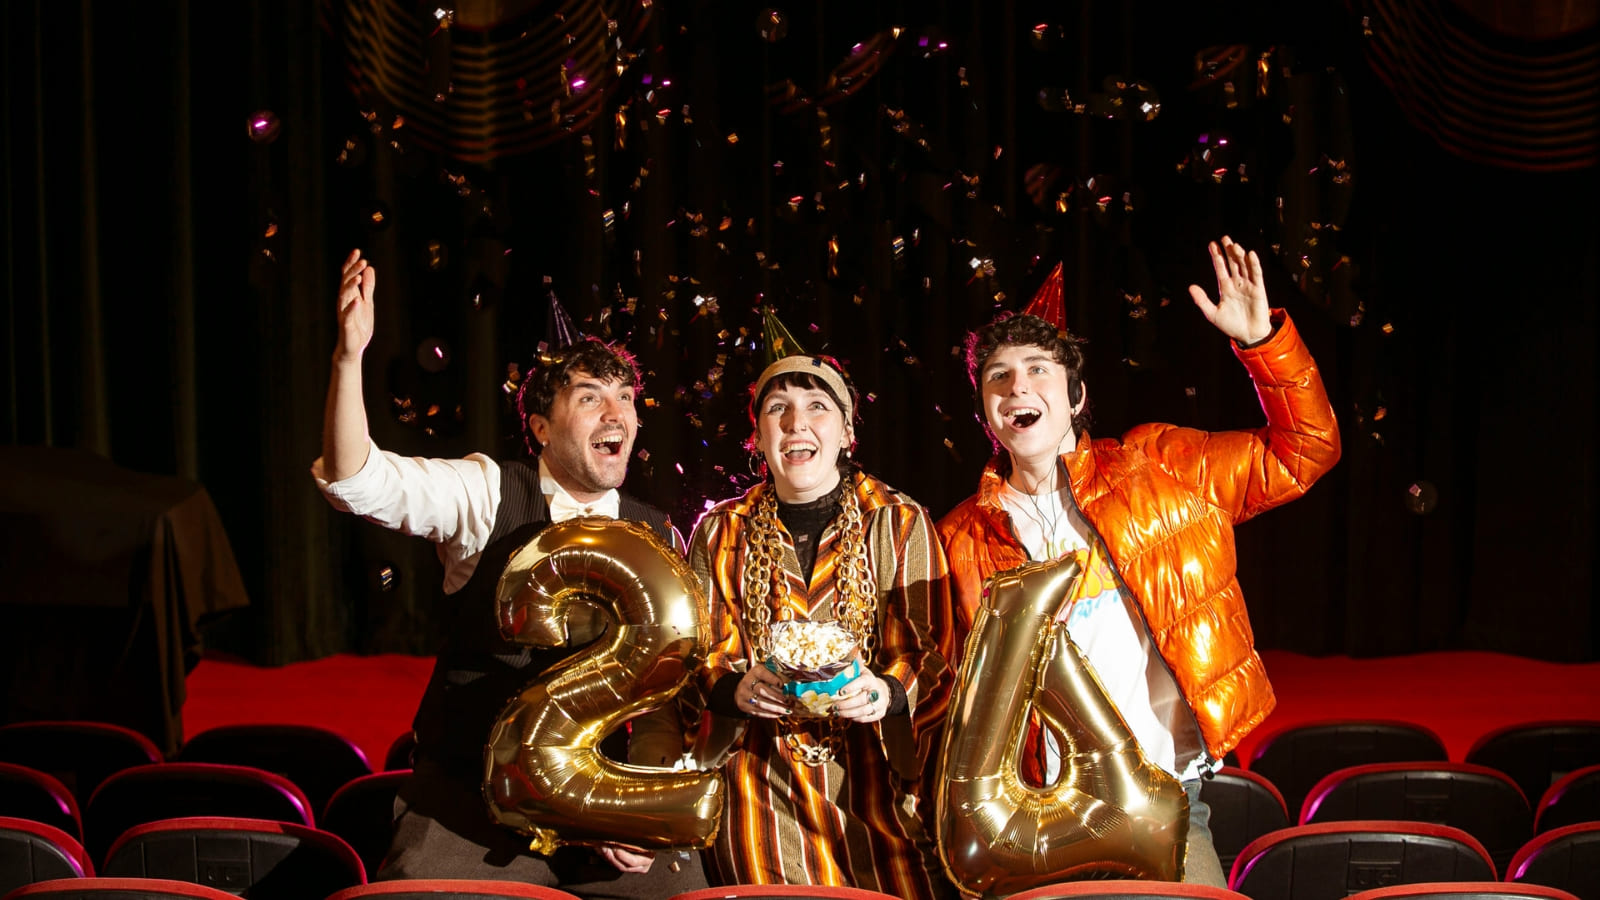 Three people stand in a cinema screen, surrounded by chairs. They look exited, are smiling, and are holding a large gold balloon numbers 2 and 4. They have party hats on and there is glittery confetti falling from above.